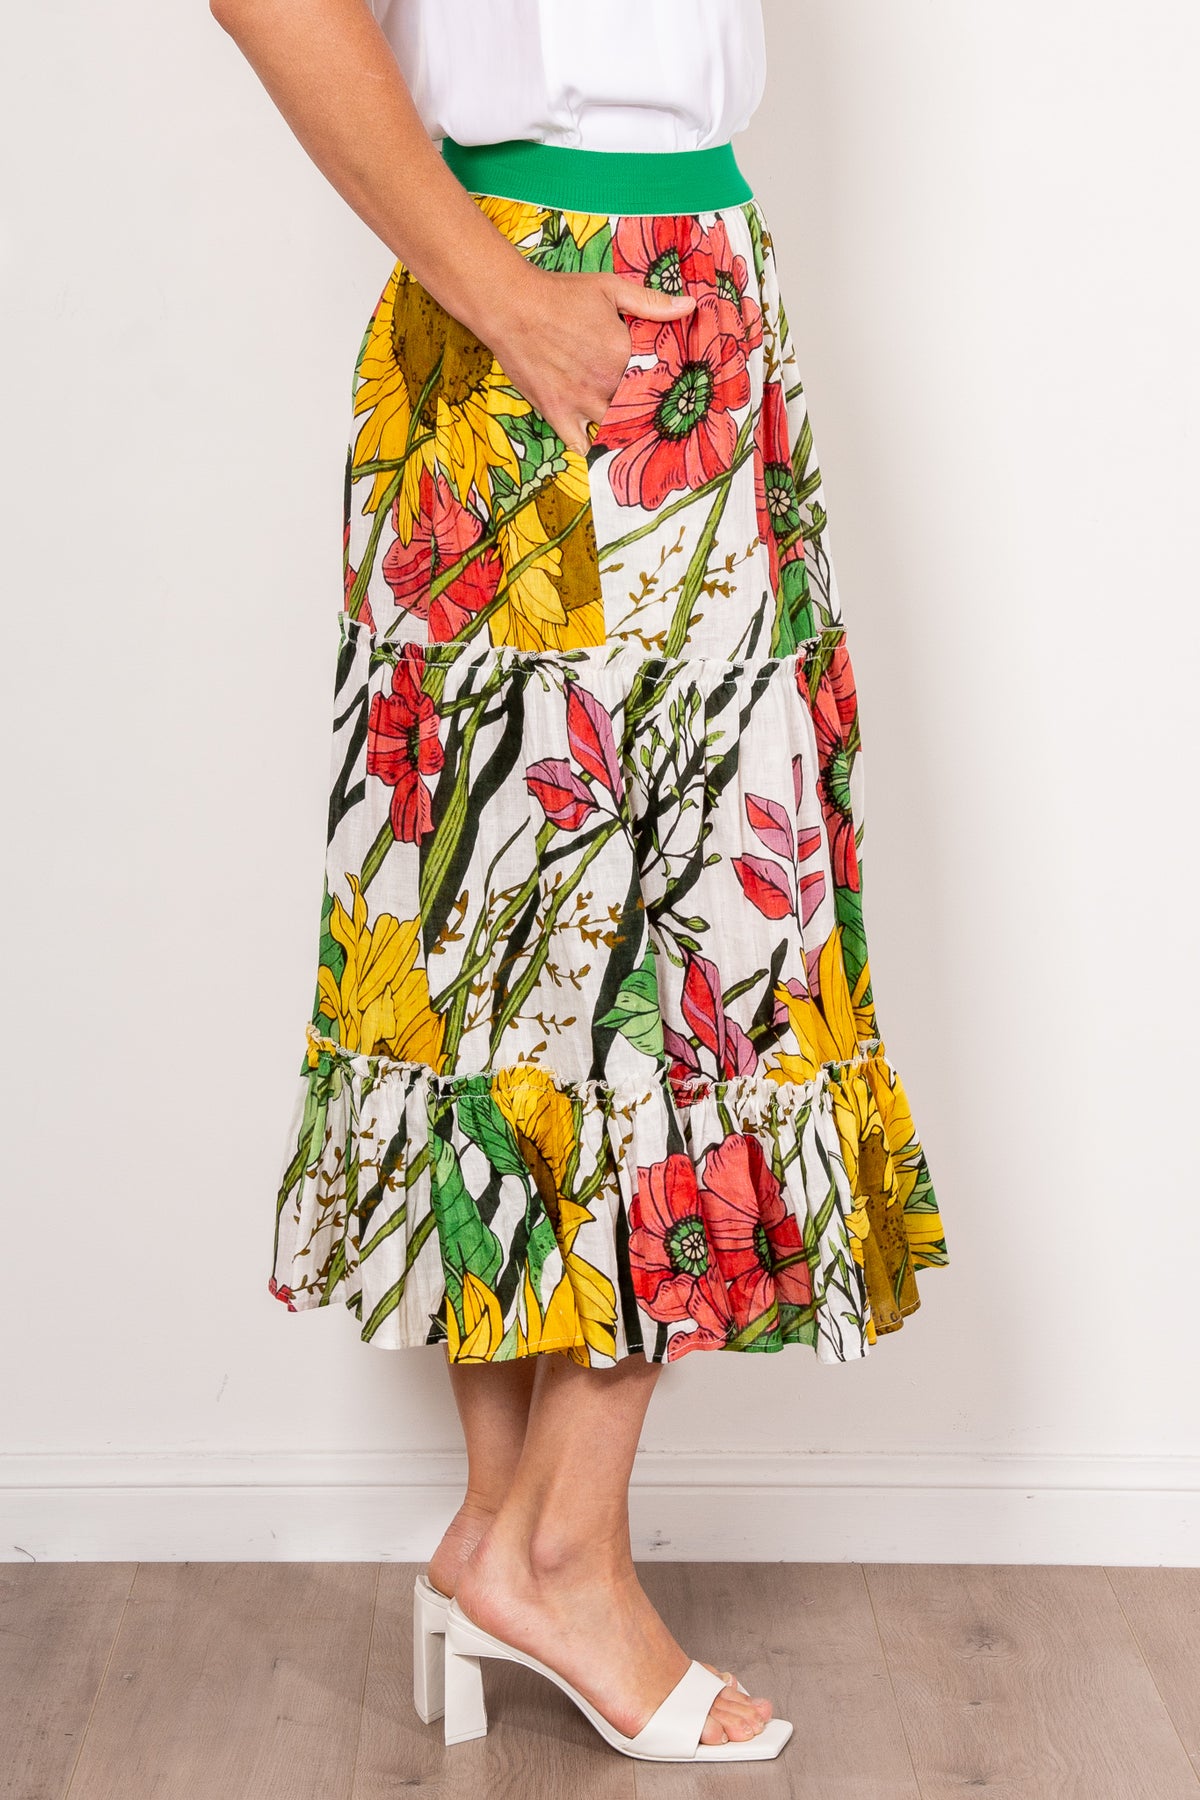 CURATE by Trelise Cooper Lawn Party Sunflower Power Skirt